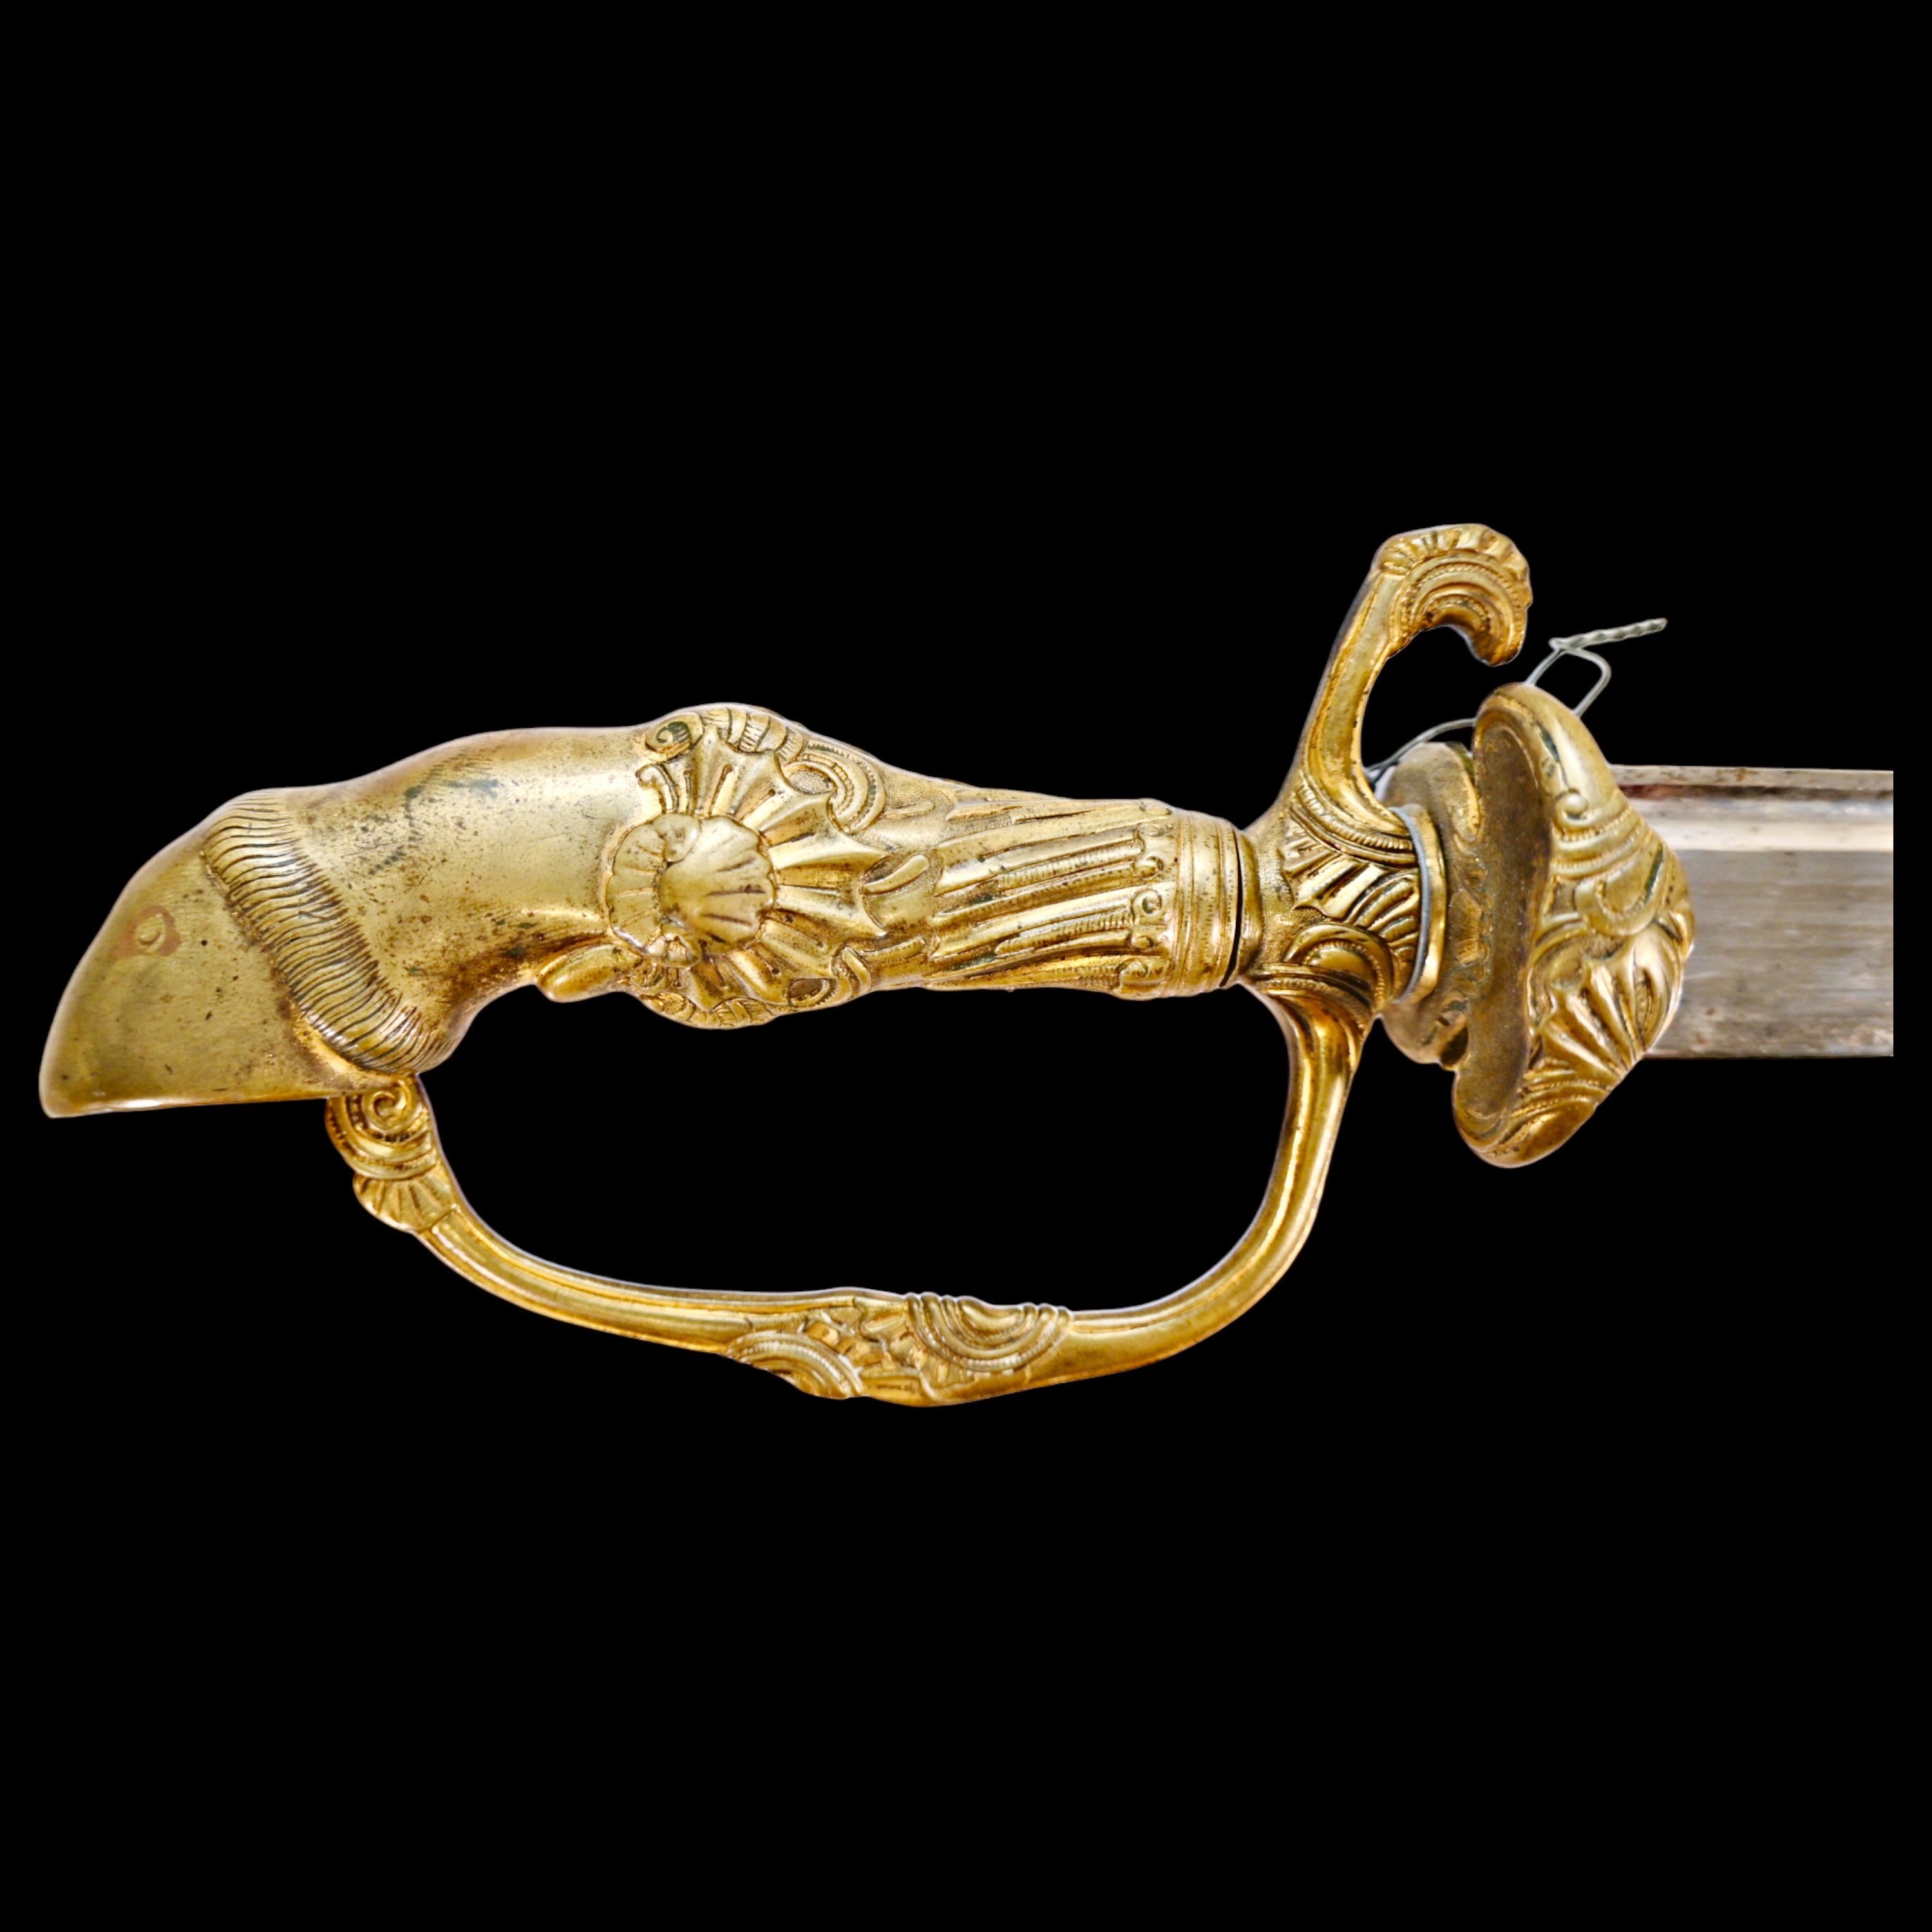 German hunting saber with knife, last half of the 18th century. - Image 14 of 26